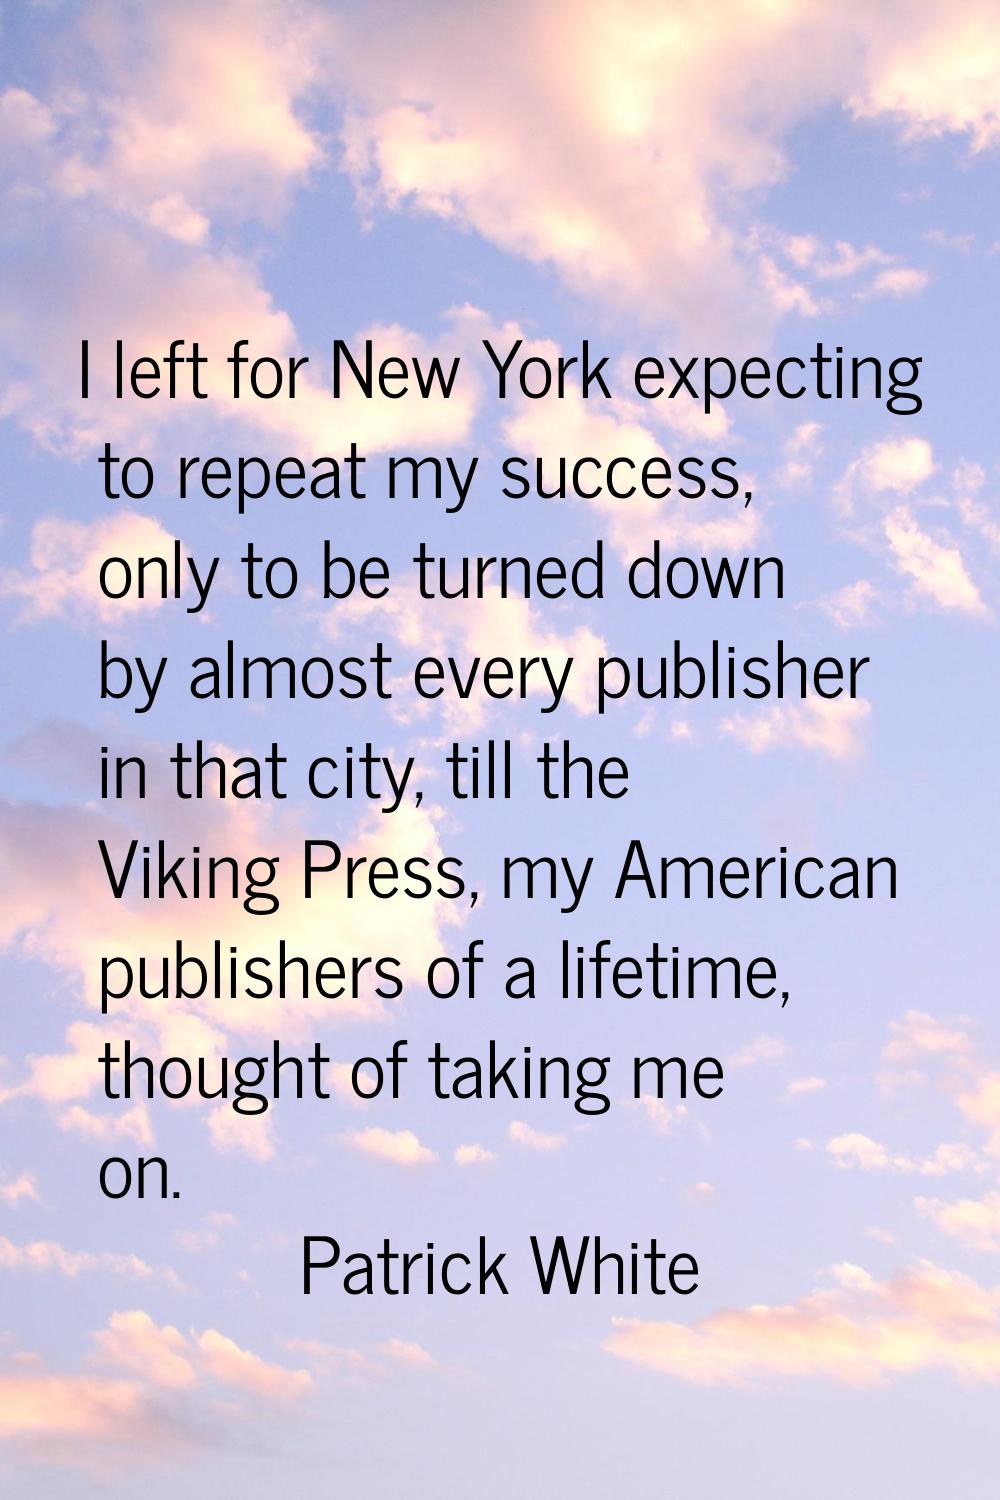 I left for New York expecting to repeat my success, only to be turned down by almost every publishe